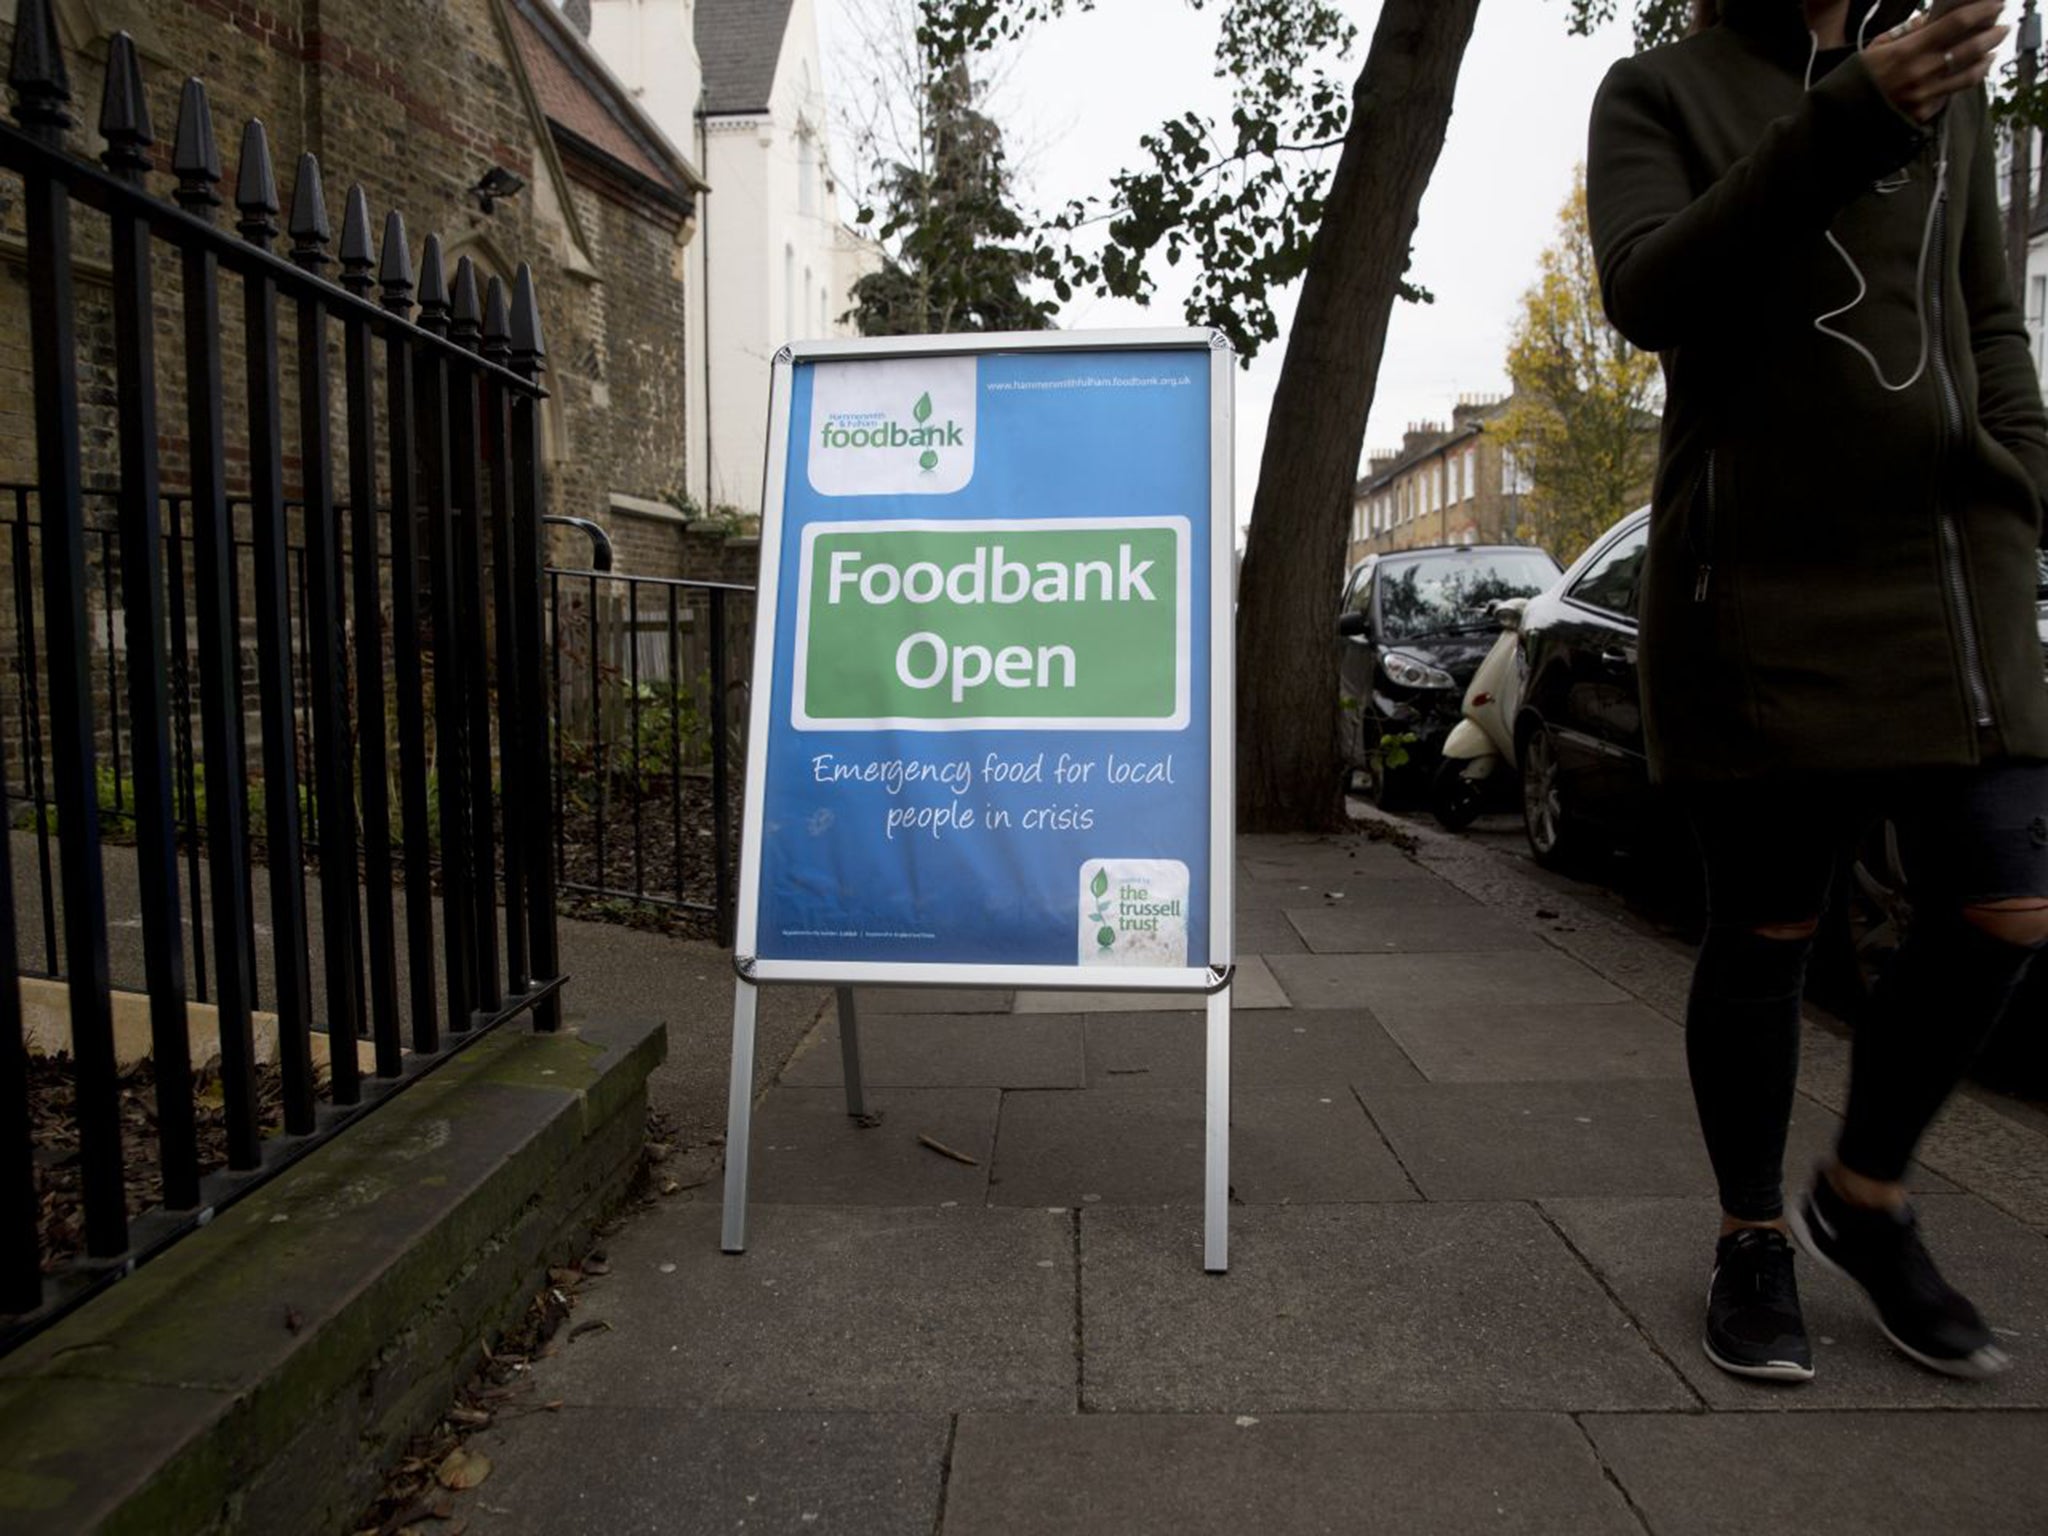 The poorest Britons are increasingly reliant on the more than 400 food banks open across the country